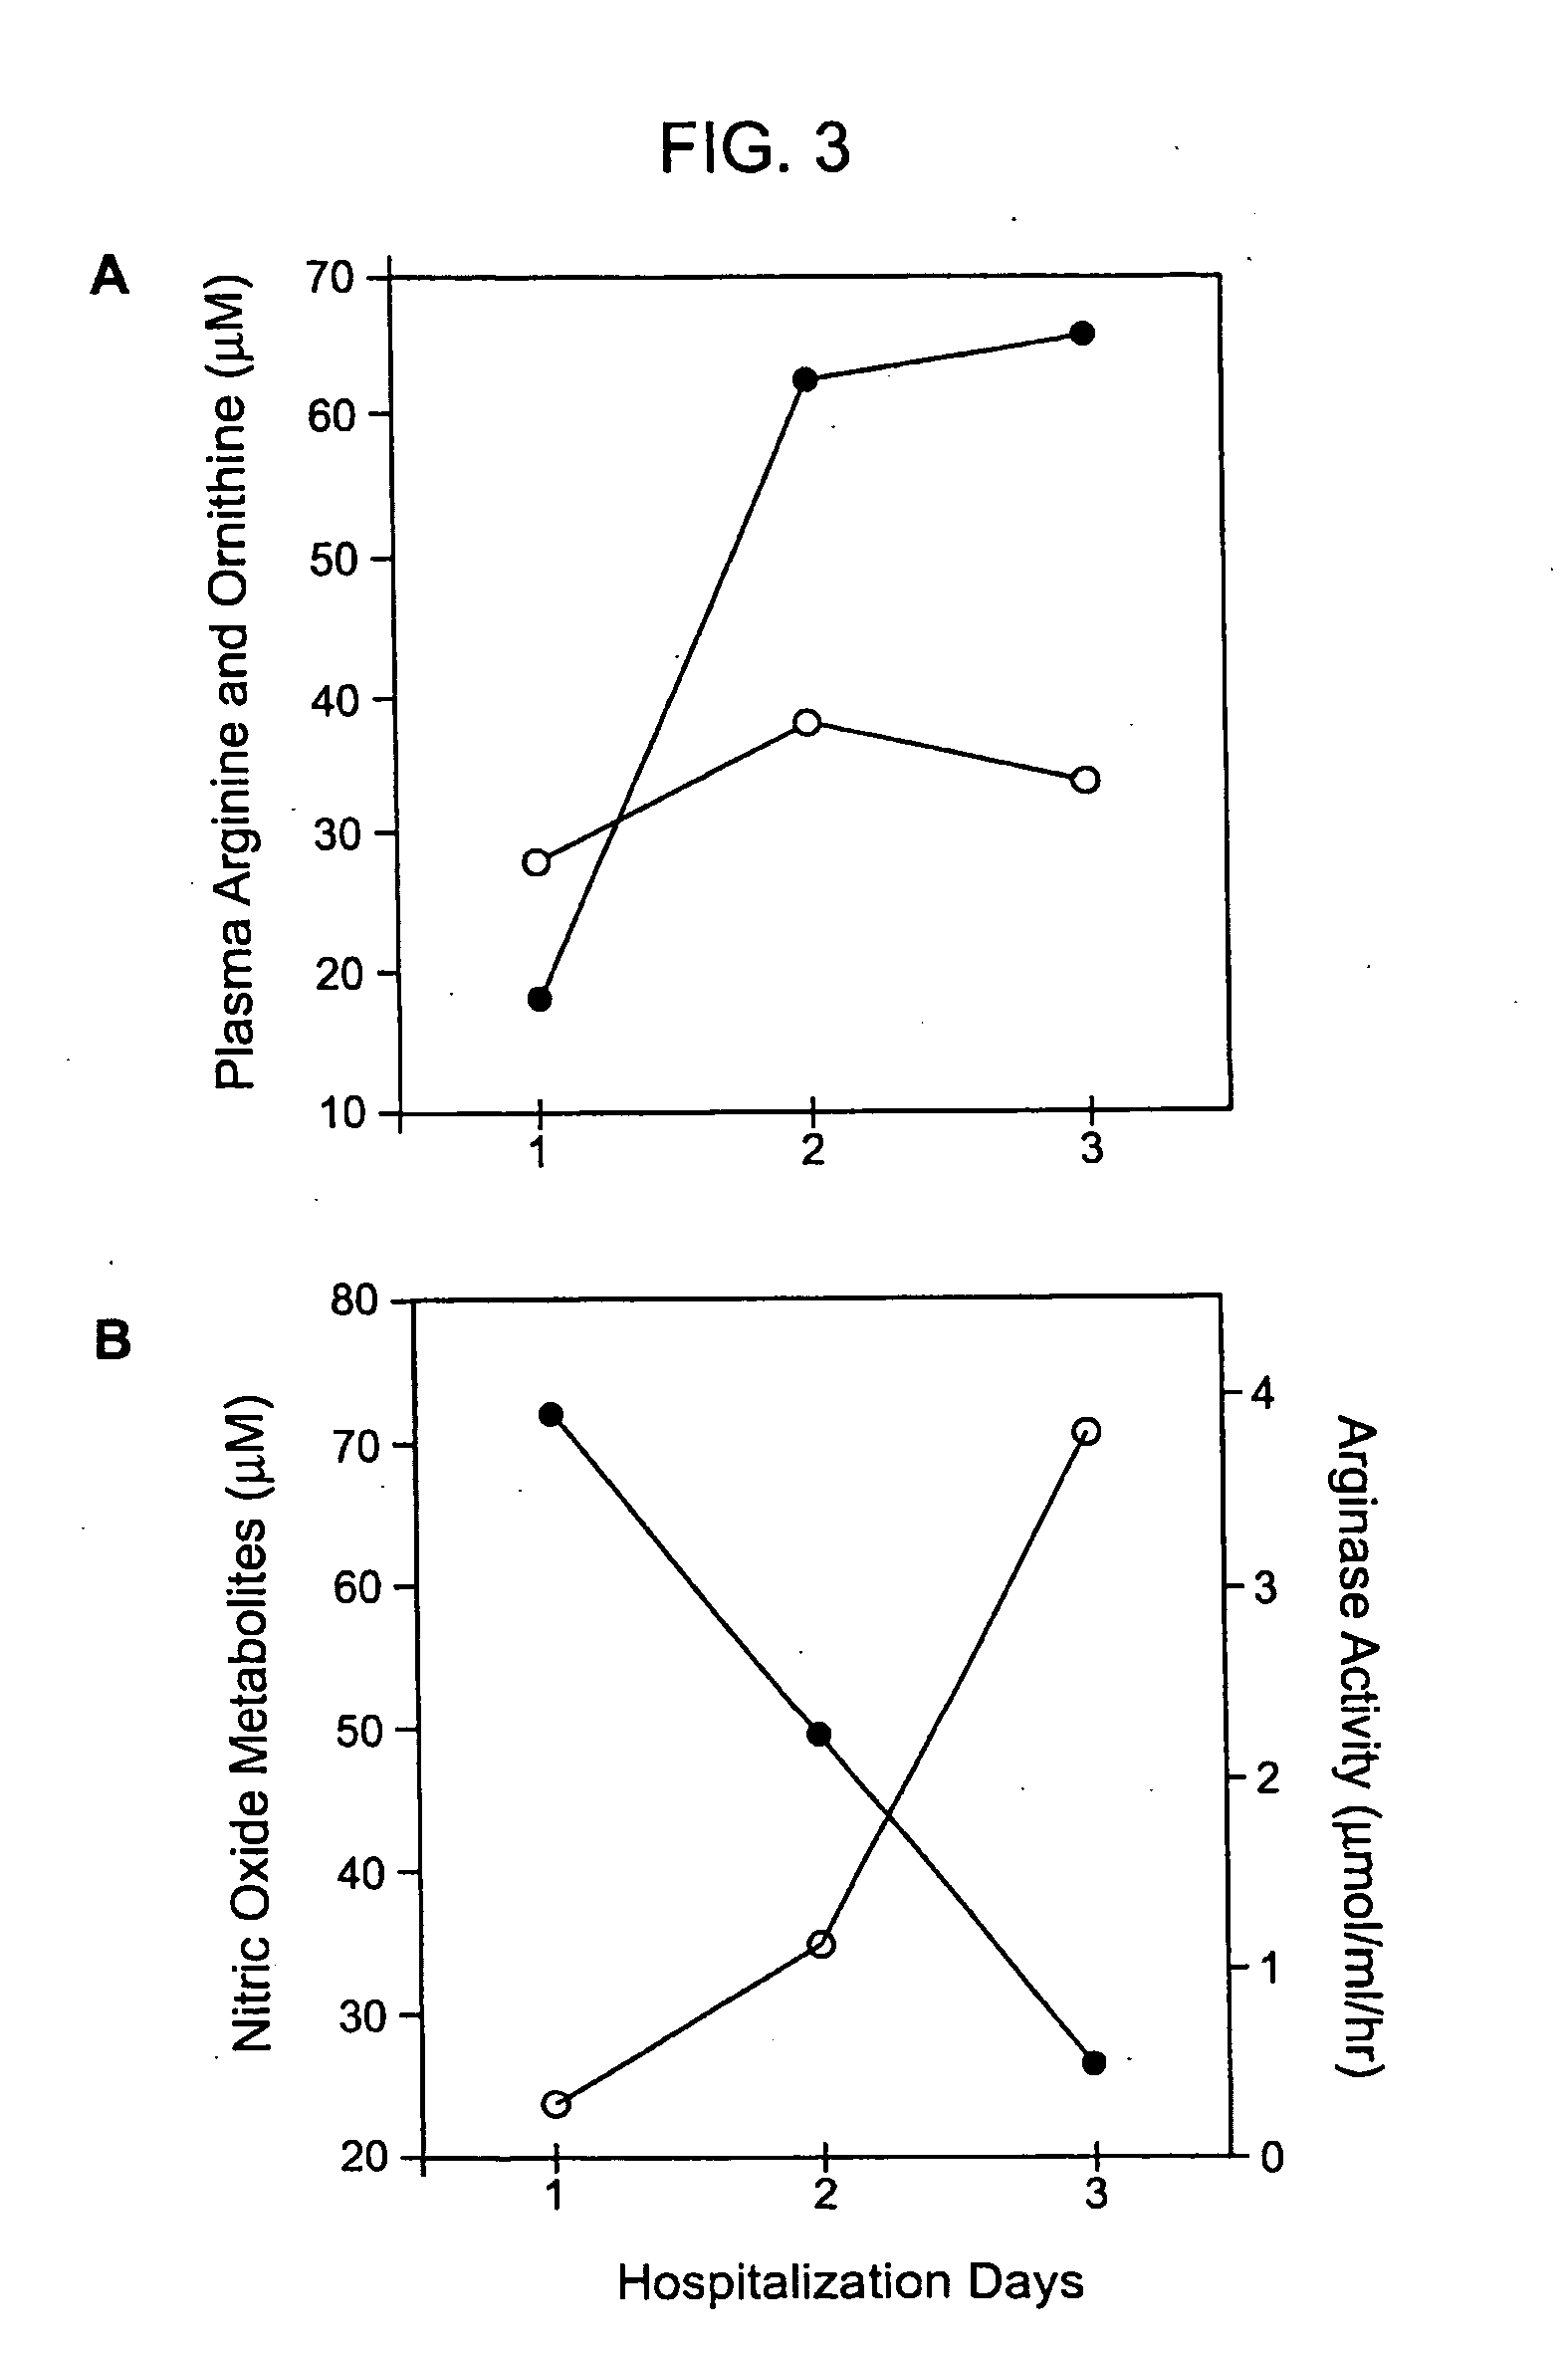 Treatment and diagnosis of conditions associated with elevated arginase activity